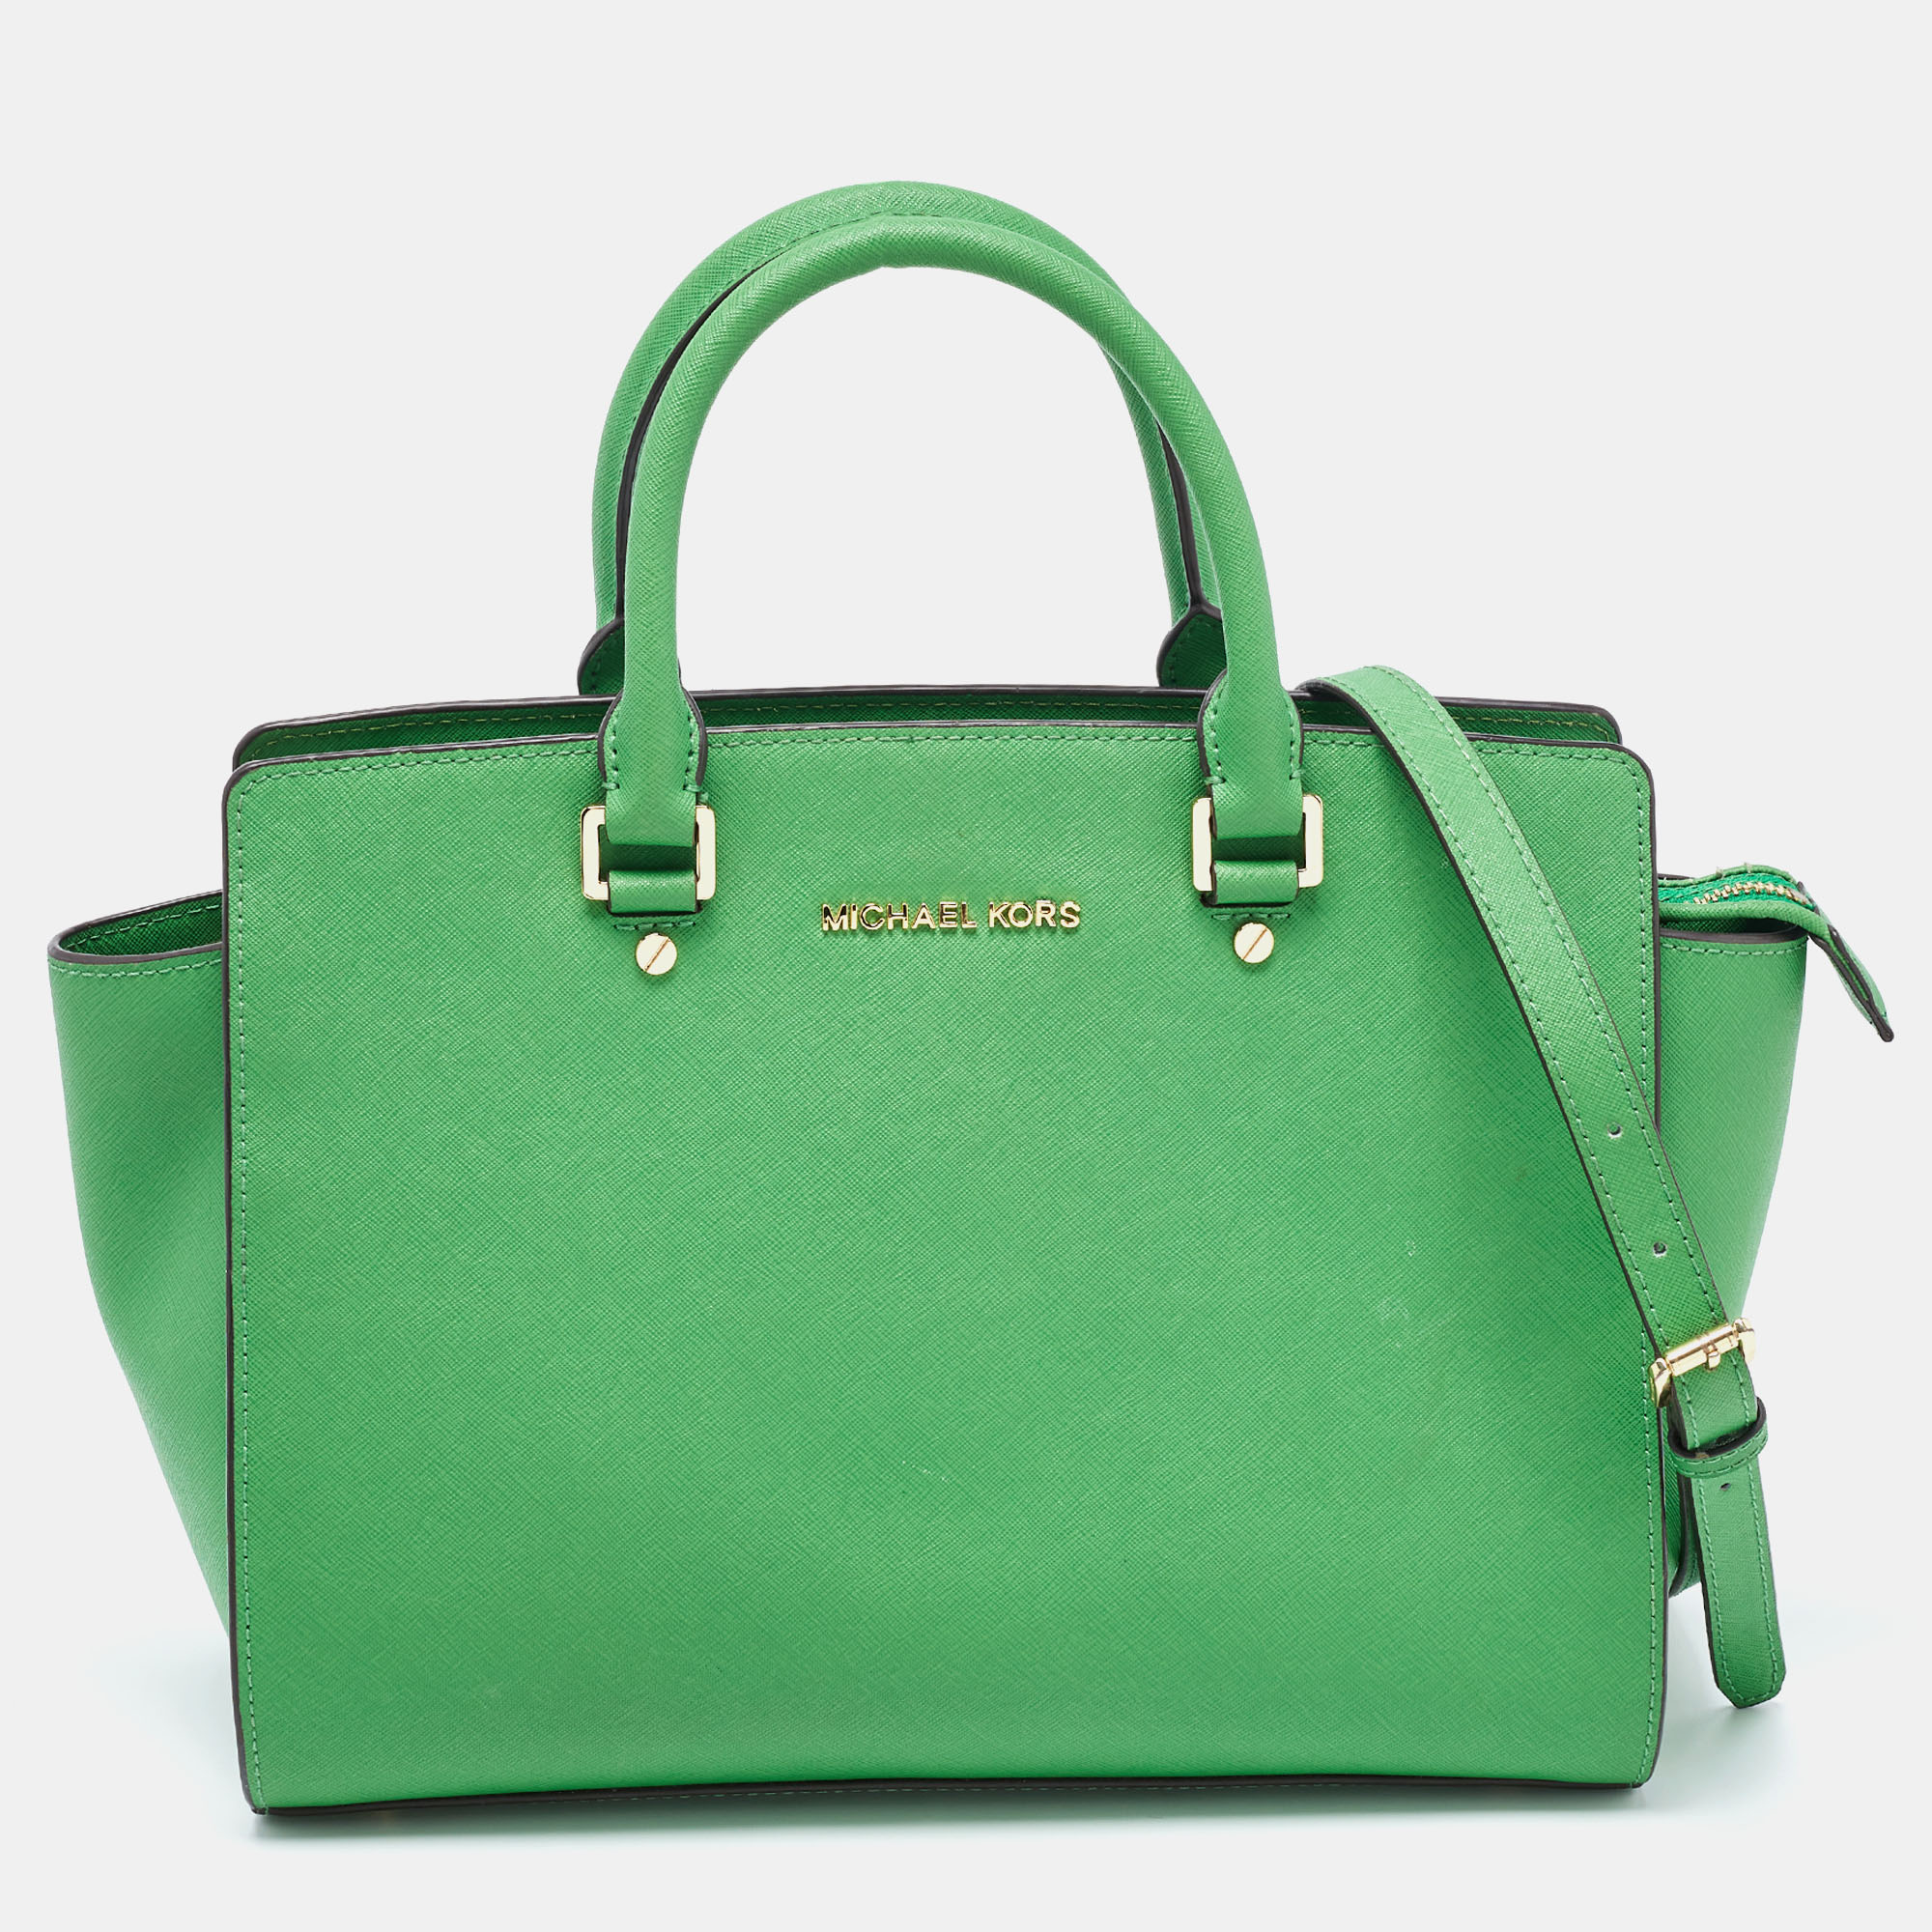 

Michael Kors Green Saffiano Lux Leather Large Selma Tote